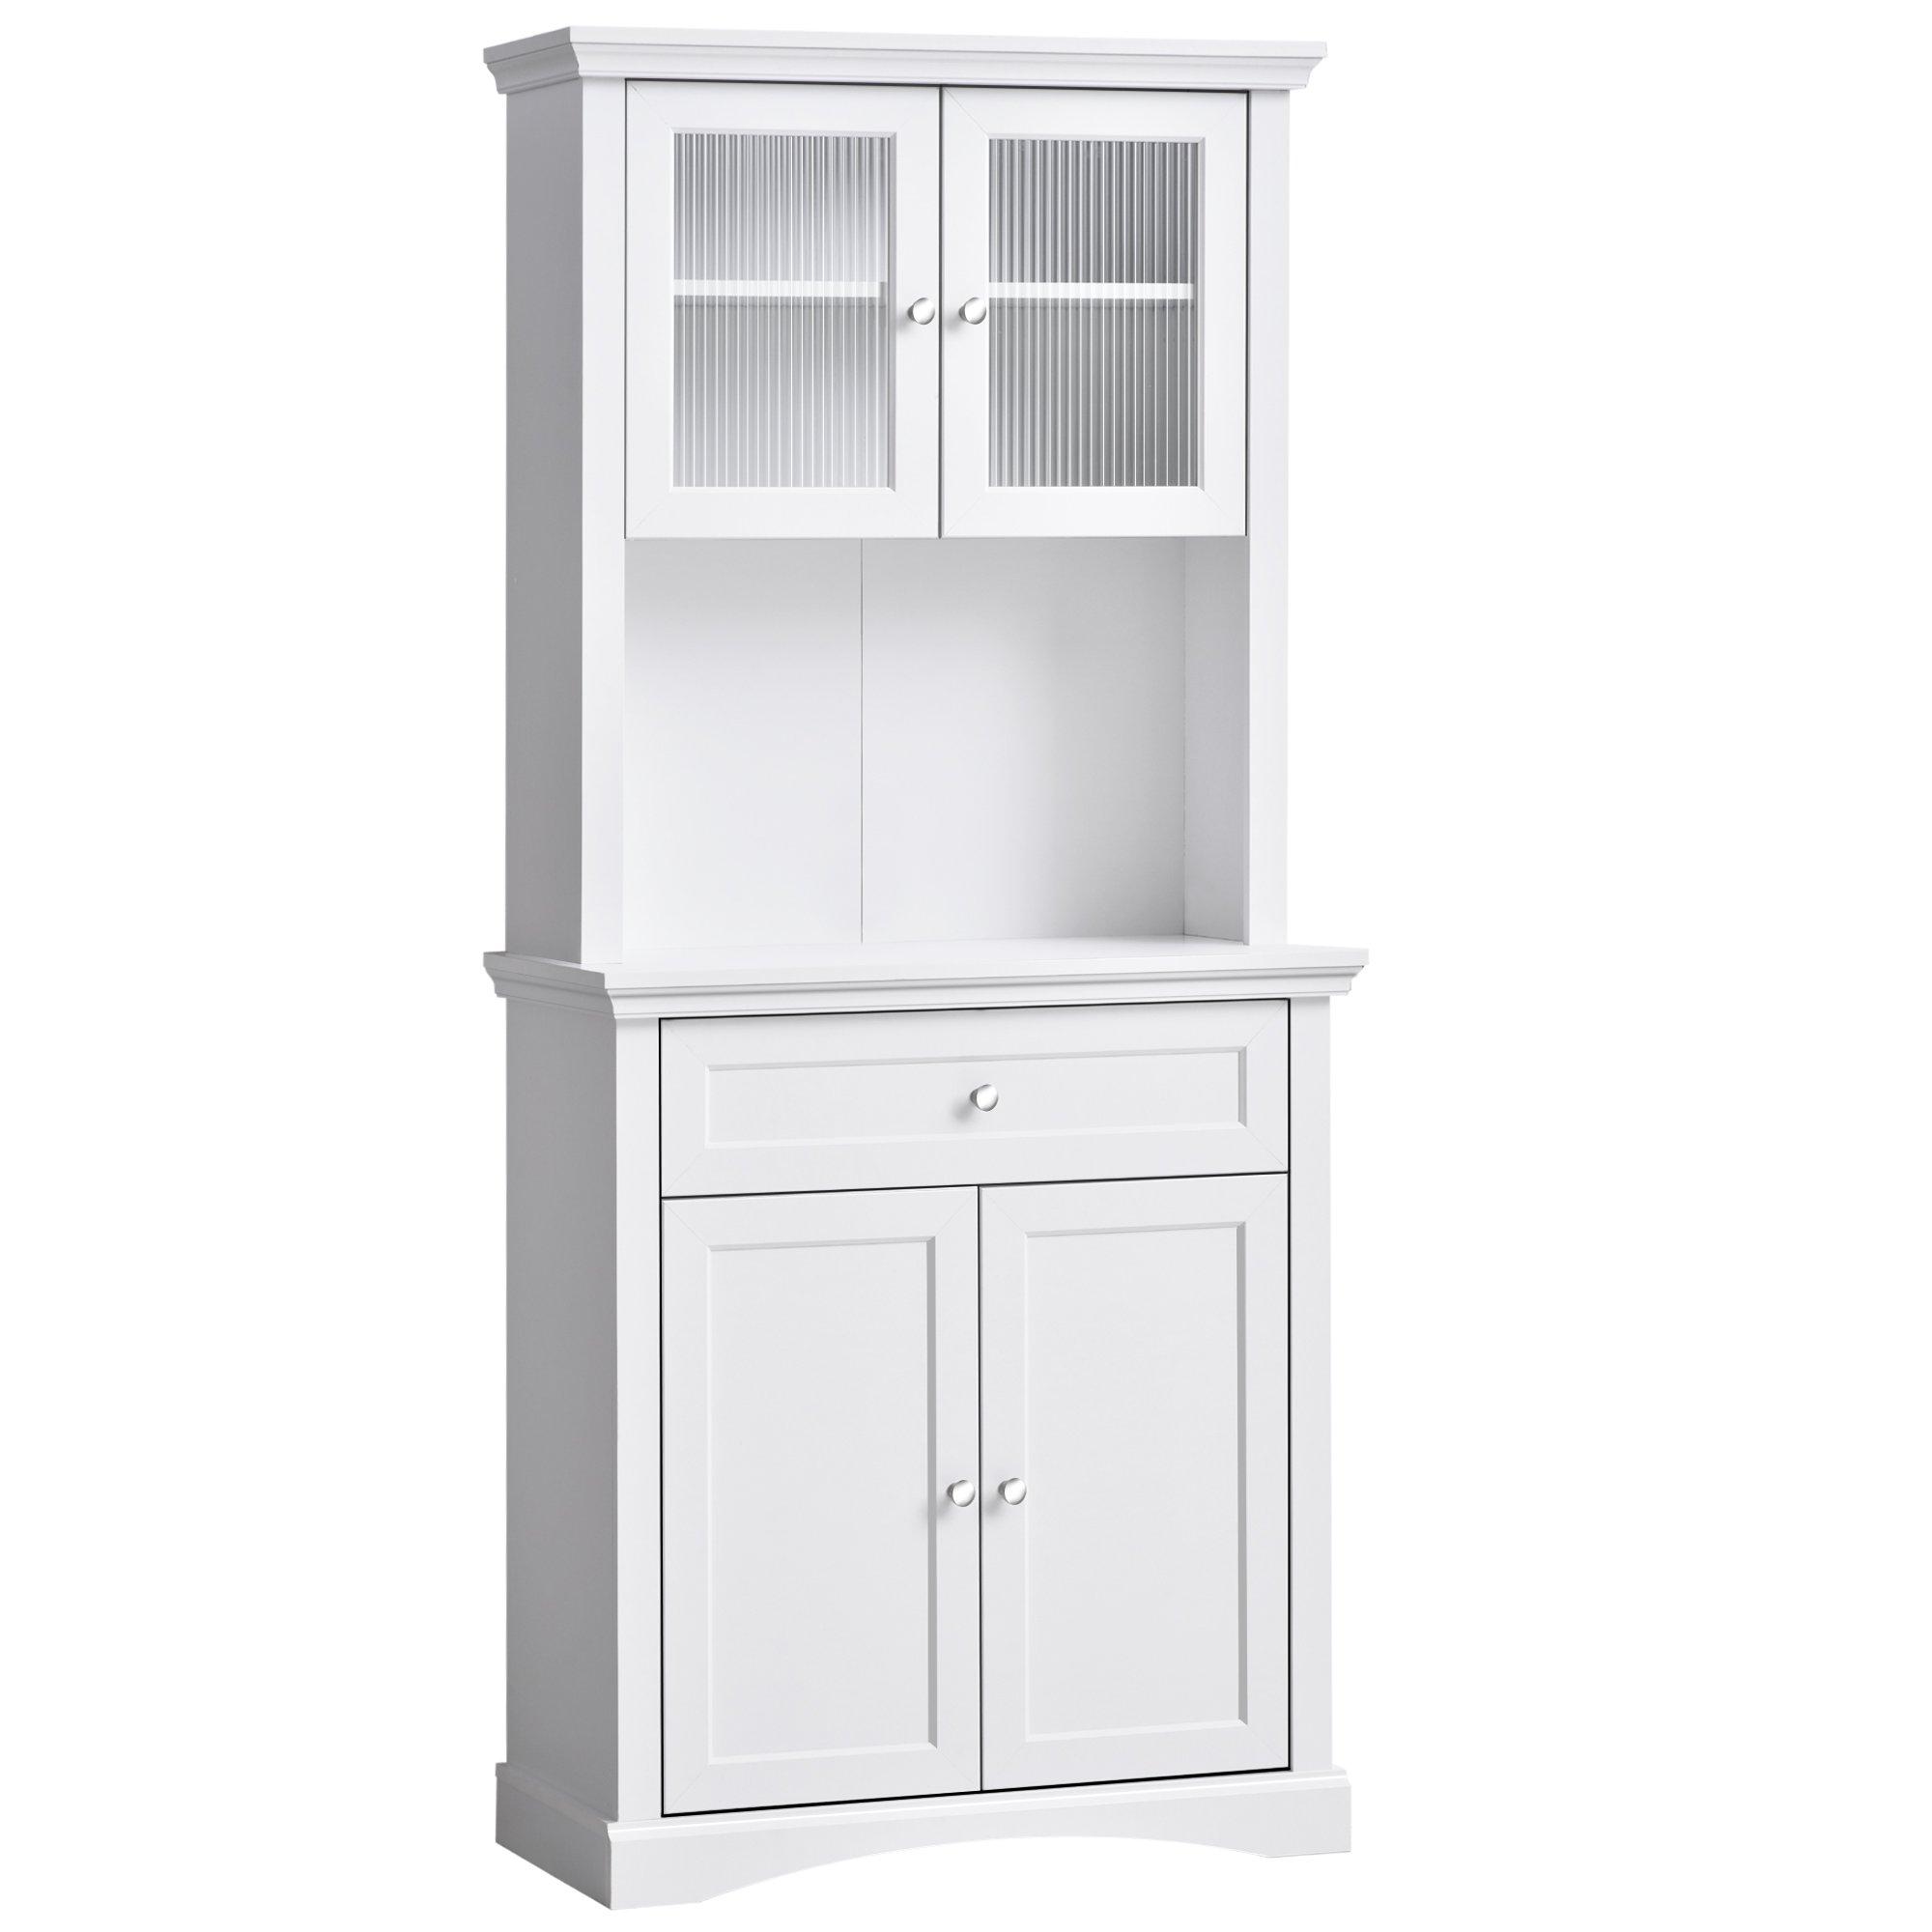 Tall Kitchen Cupboard with Glass Doors Adjustable Shelves Open Counter